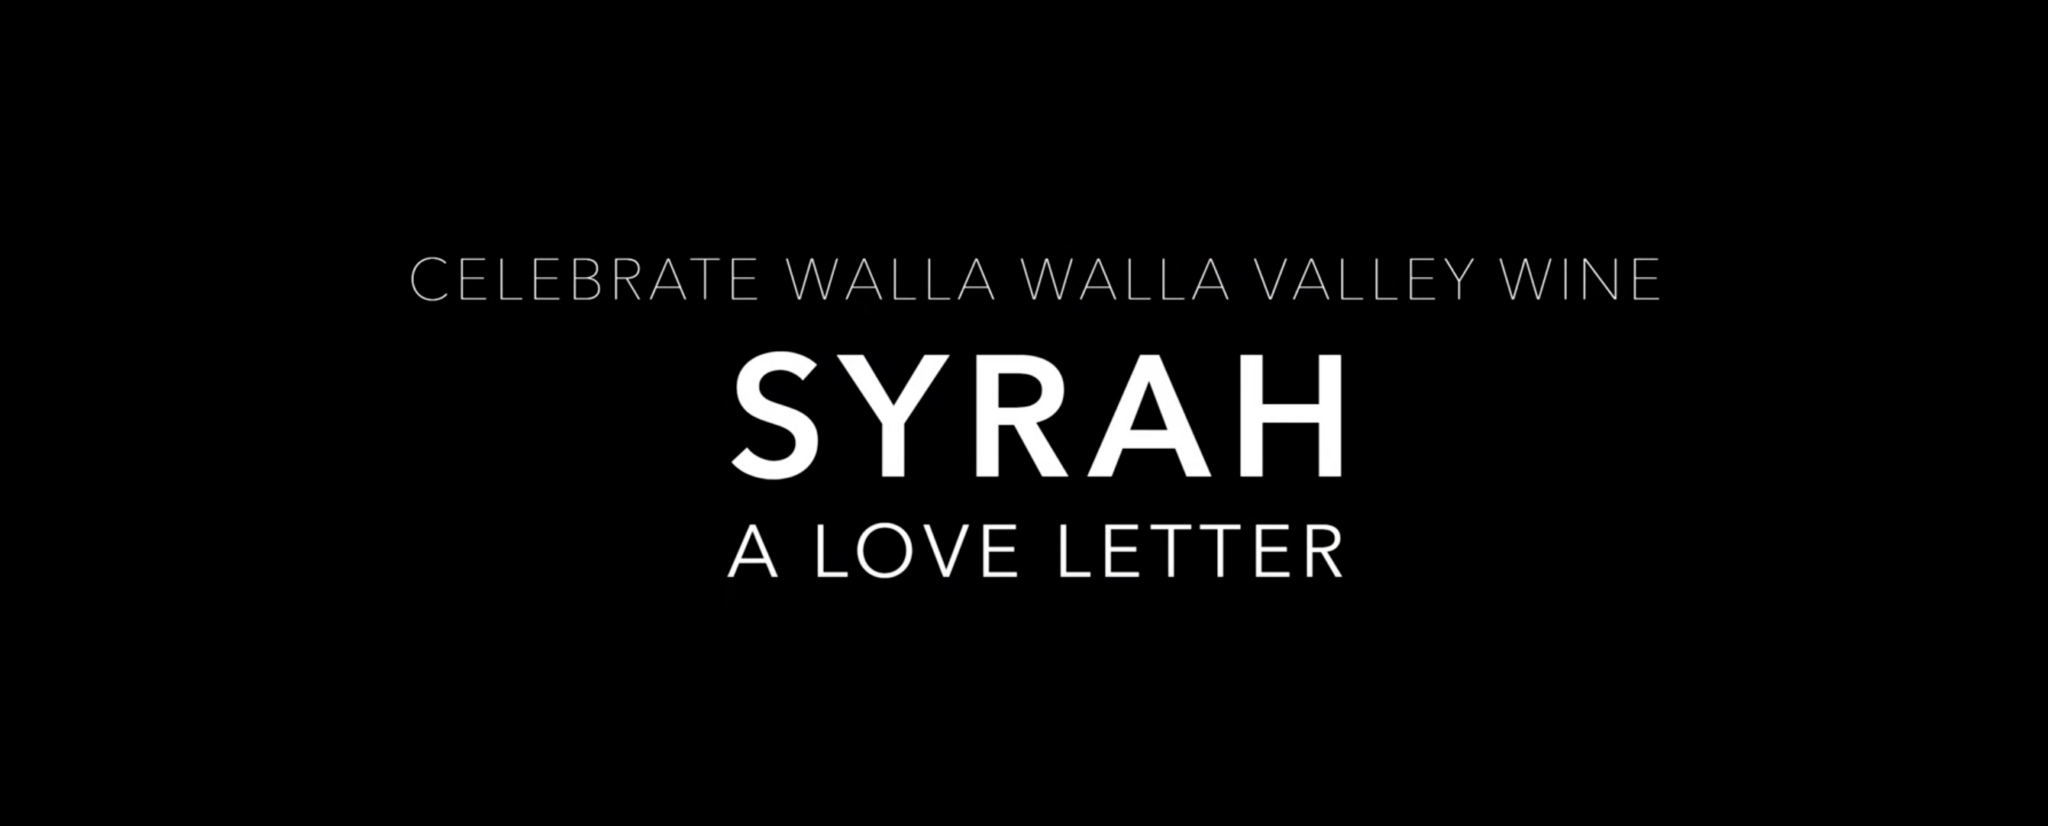 Love letters: two feature films about Walla Walla 1